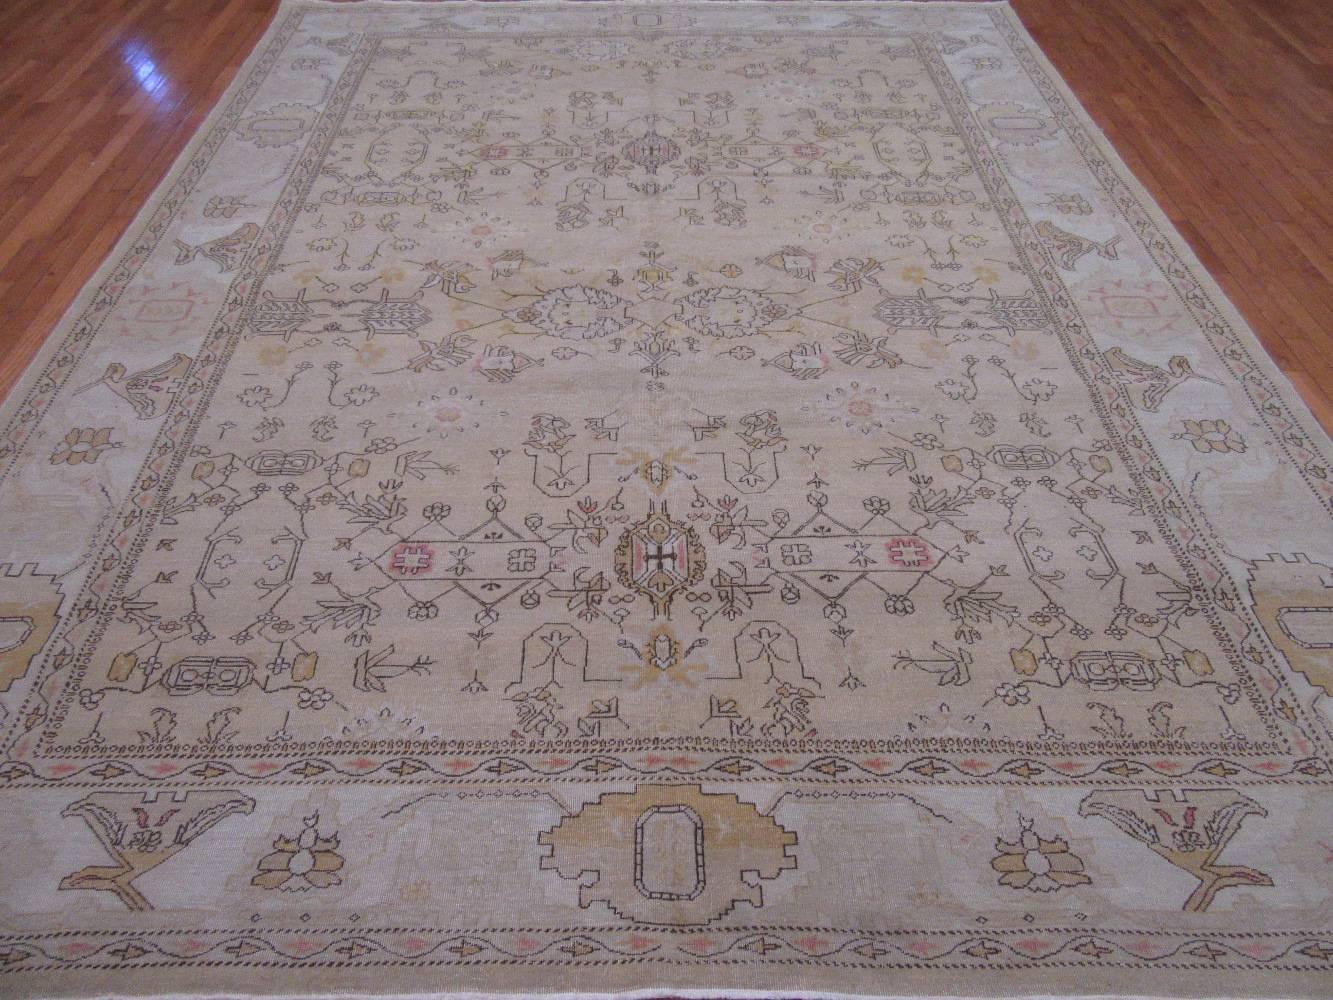 This is a beautiful hand-knotted wool rug was made in Egypt. It has an all-over Agra design on an beige color field with a flat antique look. The rug measures
9' x 11' 9''.